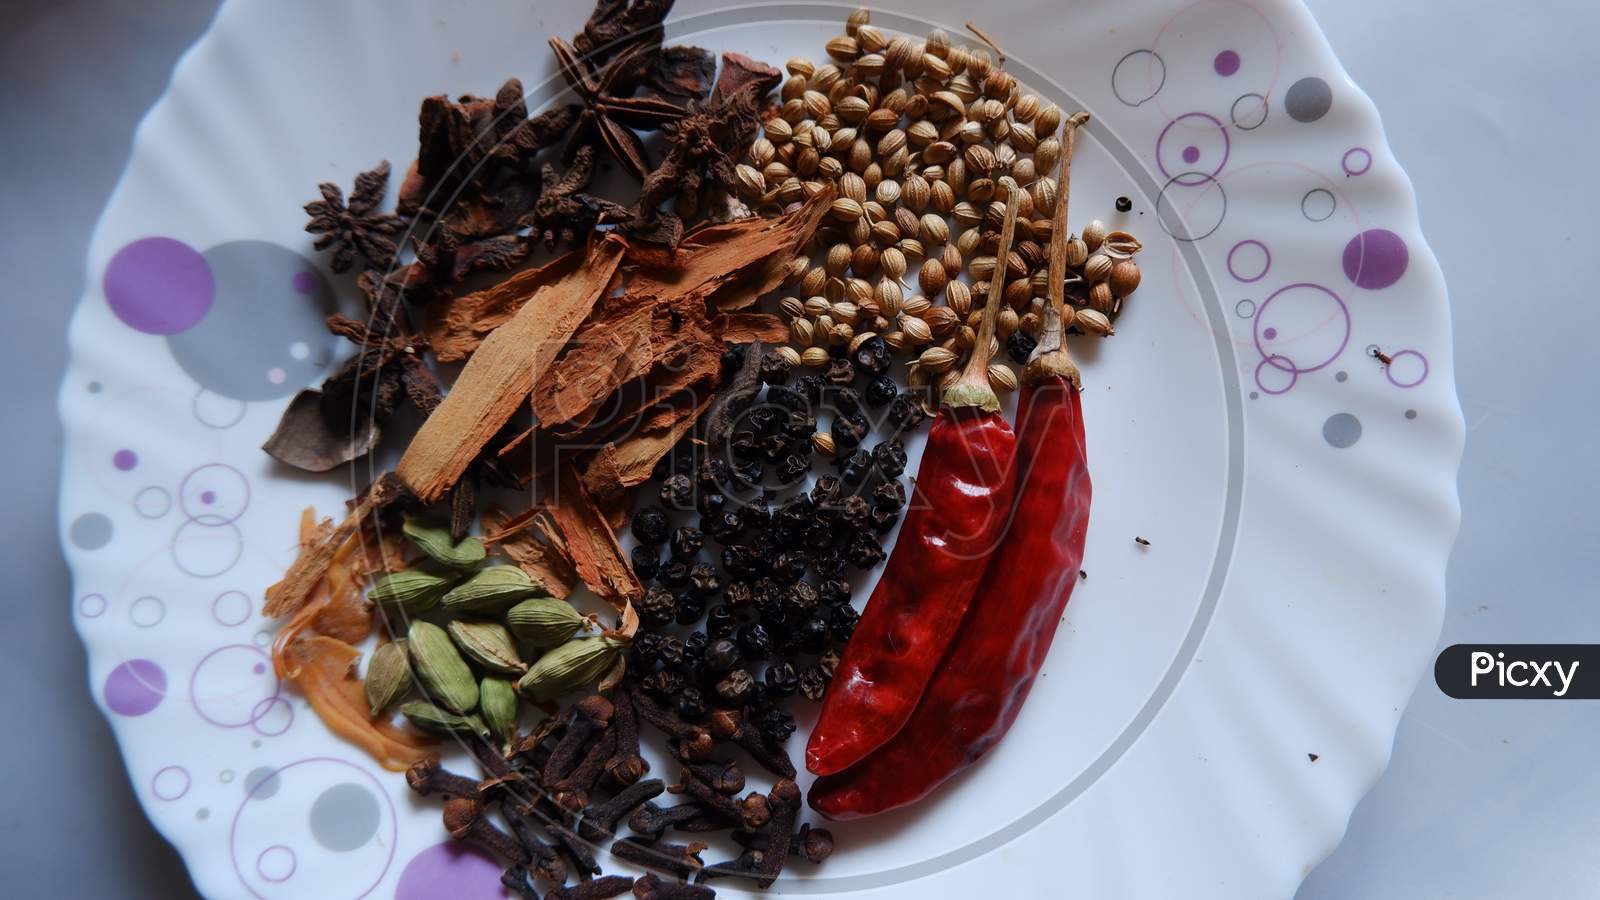 Spices of Kerala. Cinnamon, pepper, clove, star anise, cardamom, nutmeg and curry leaves ,main ingredients of Kerala cuisine.